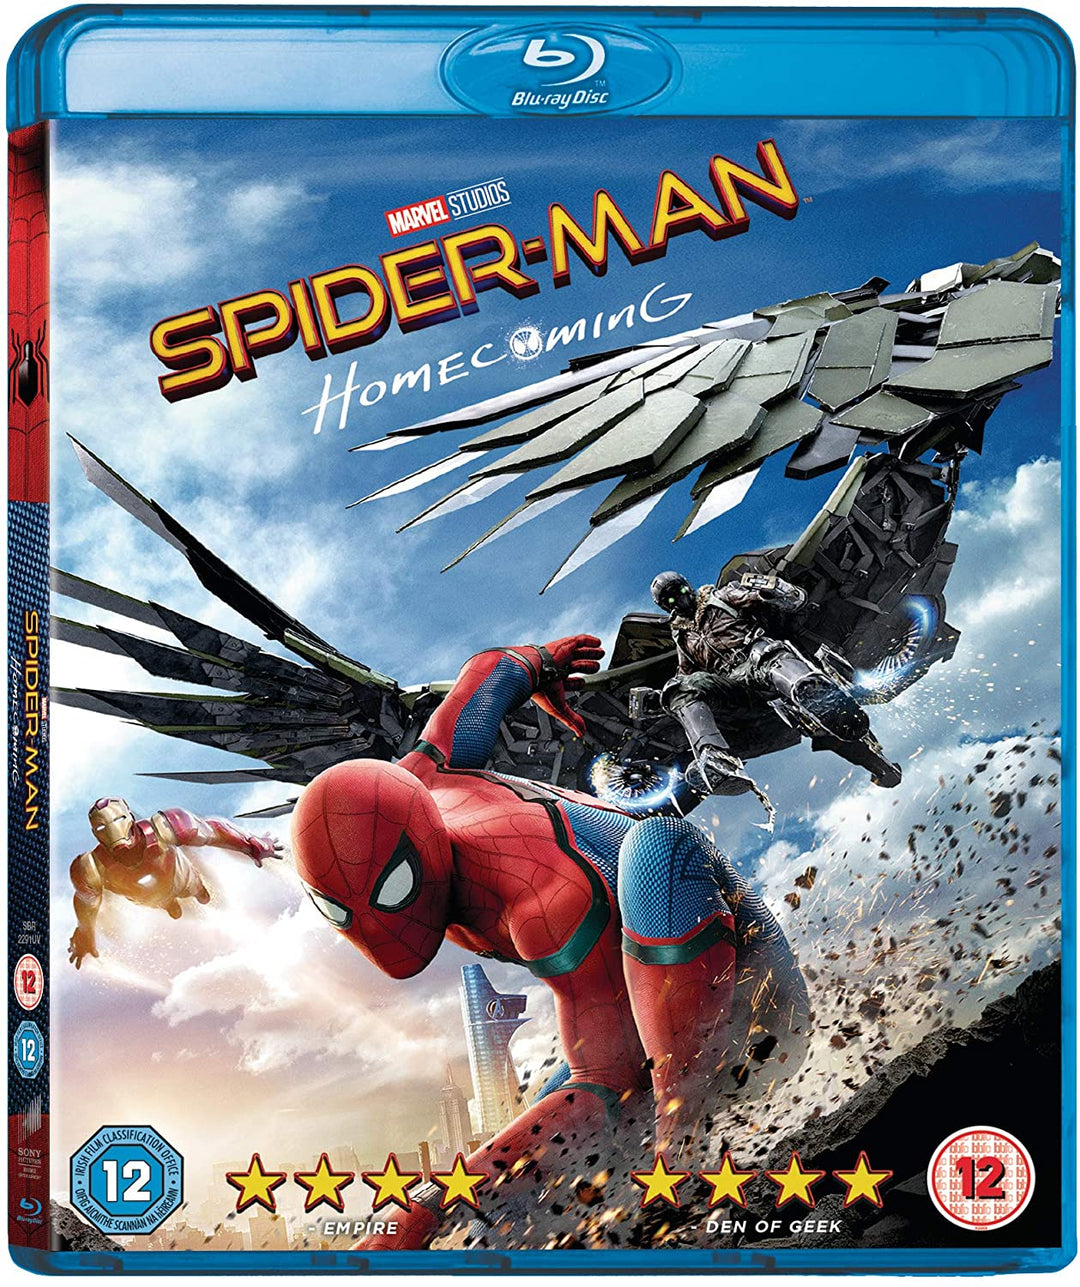 Spider-Man Homecoming - Action/Adventure [Blu-ray]